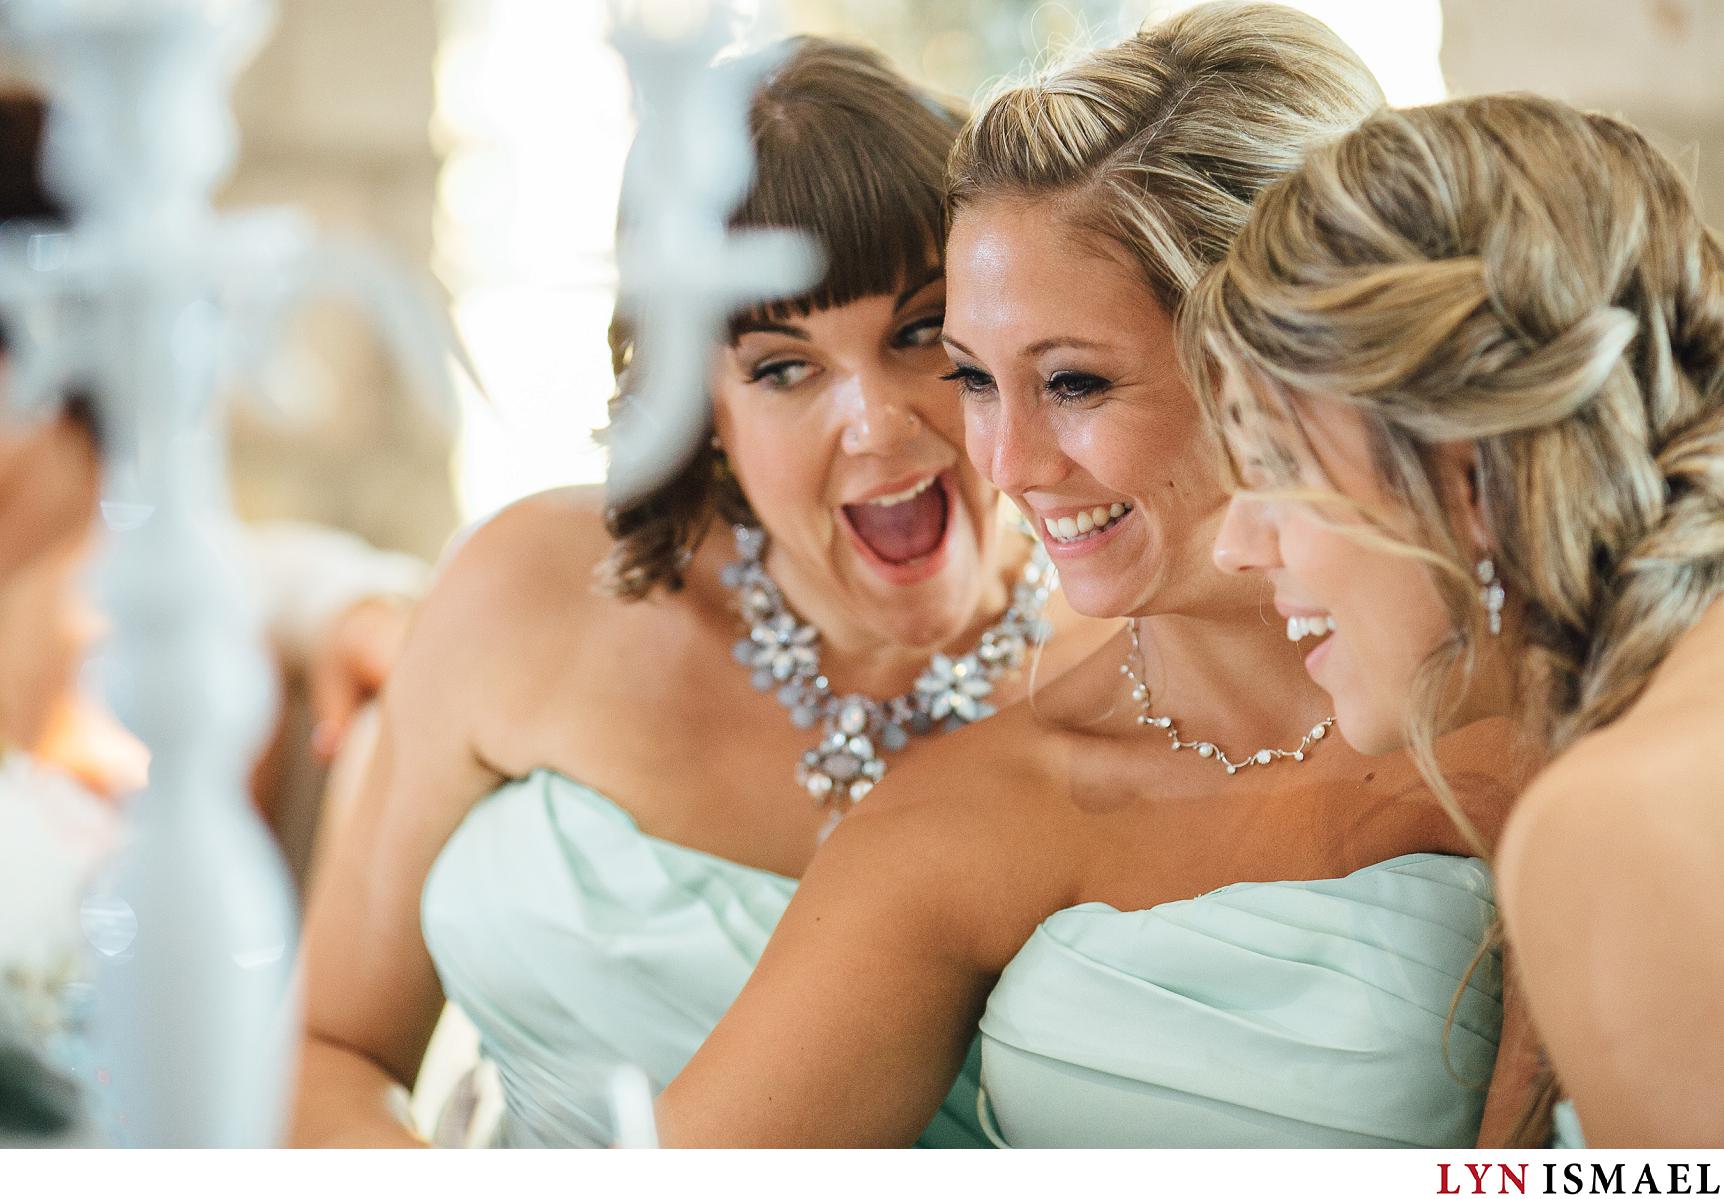 Bridesmaids pose for a selfie at a Waterloo Region wedding.